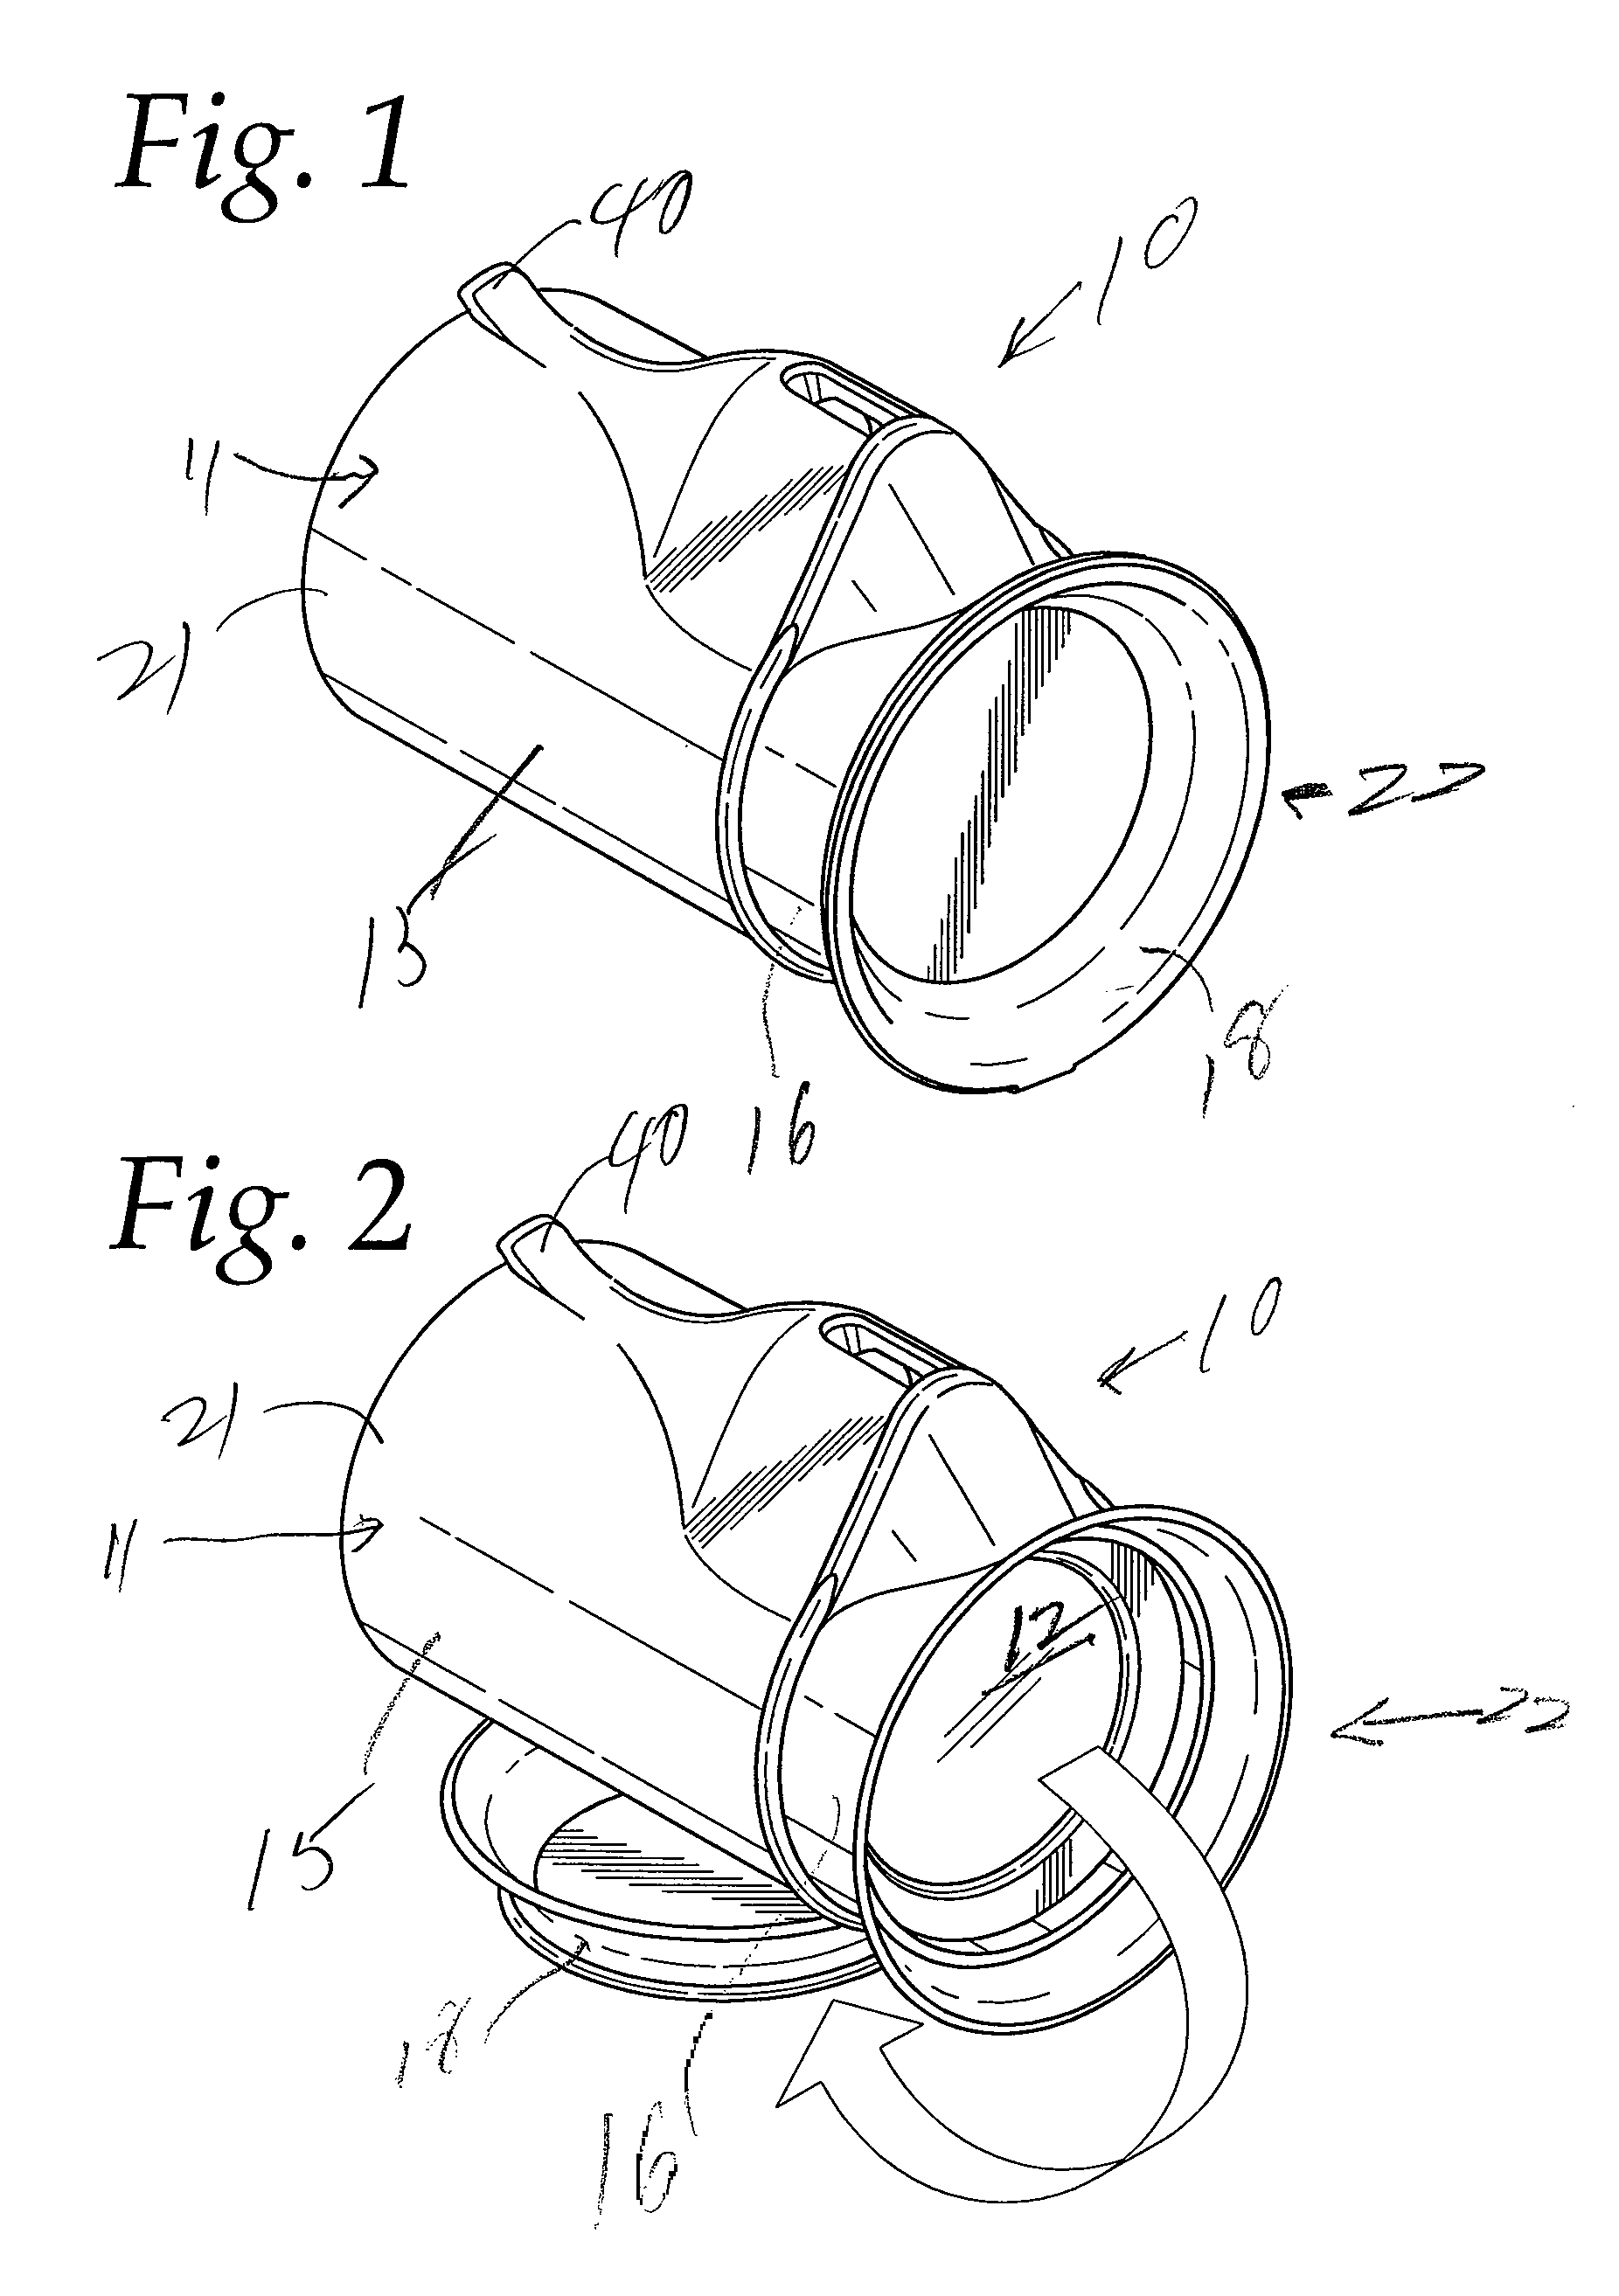 Eye cup night filter attachment and mounting device